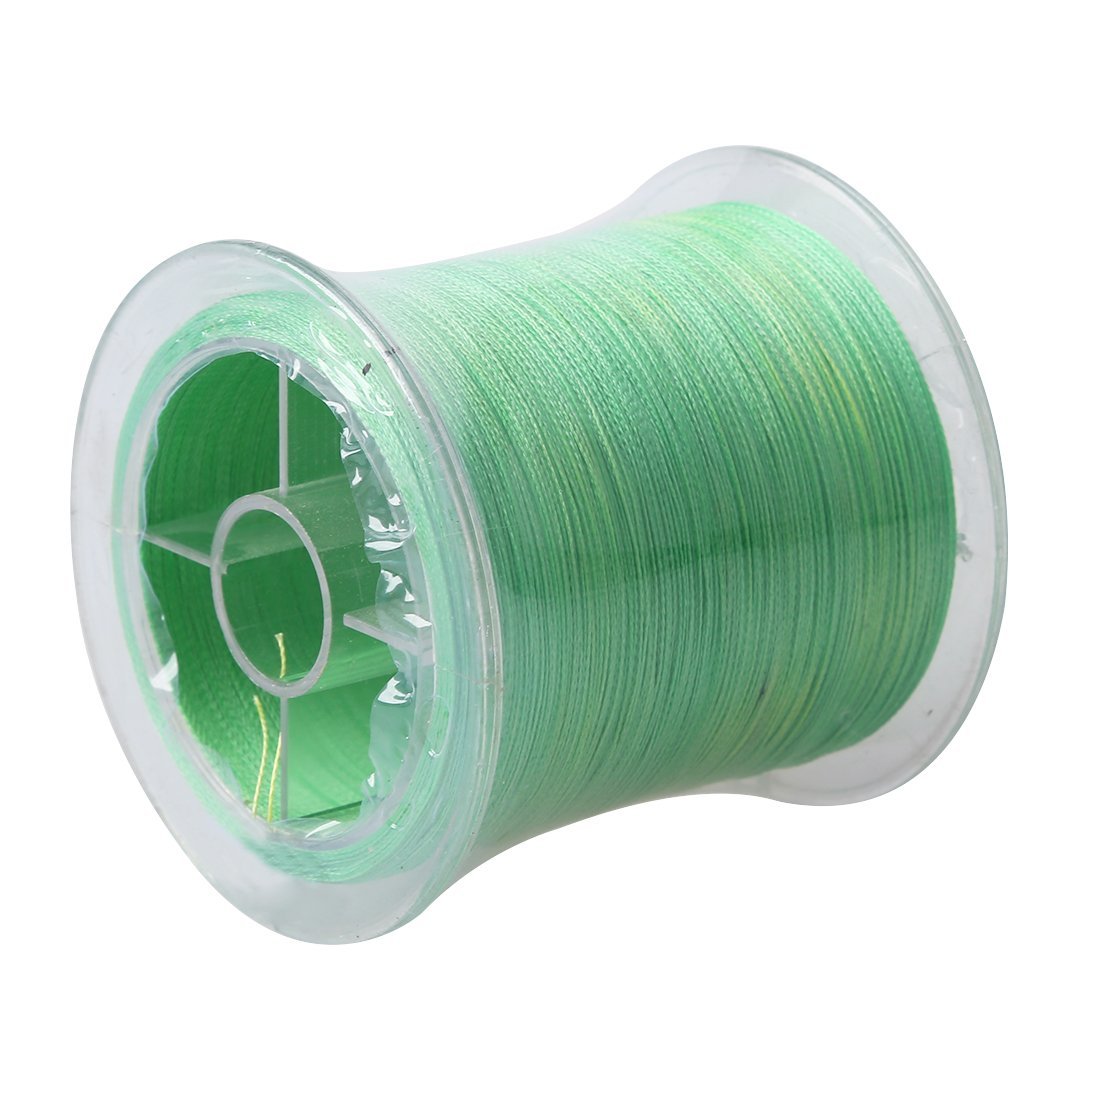 Cgds 300M 20Lb 0.18Mm Fishing Line Braided Lines With 4 Strong Braided Strand-China Good Deal Store-A5-Bargain Bait Box